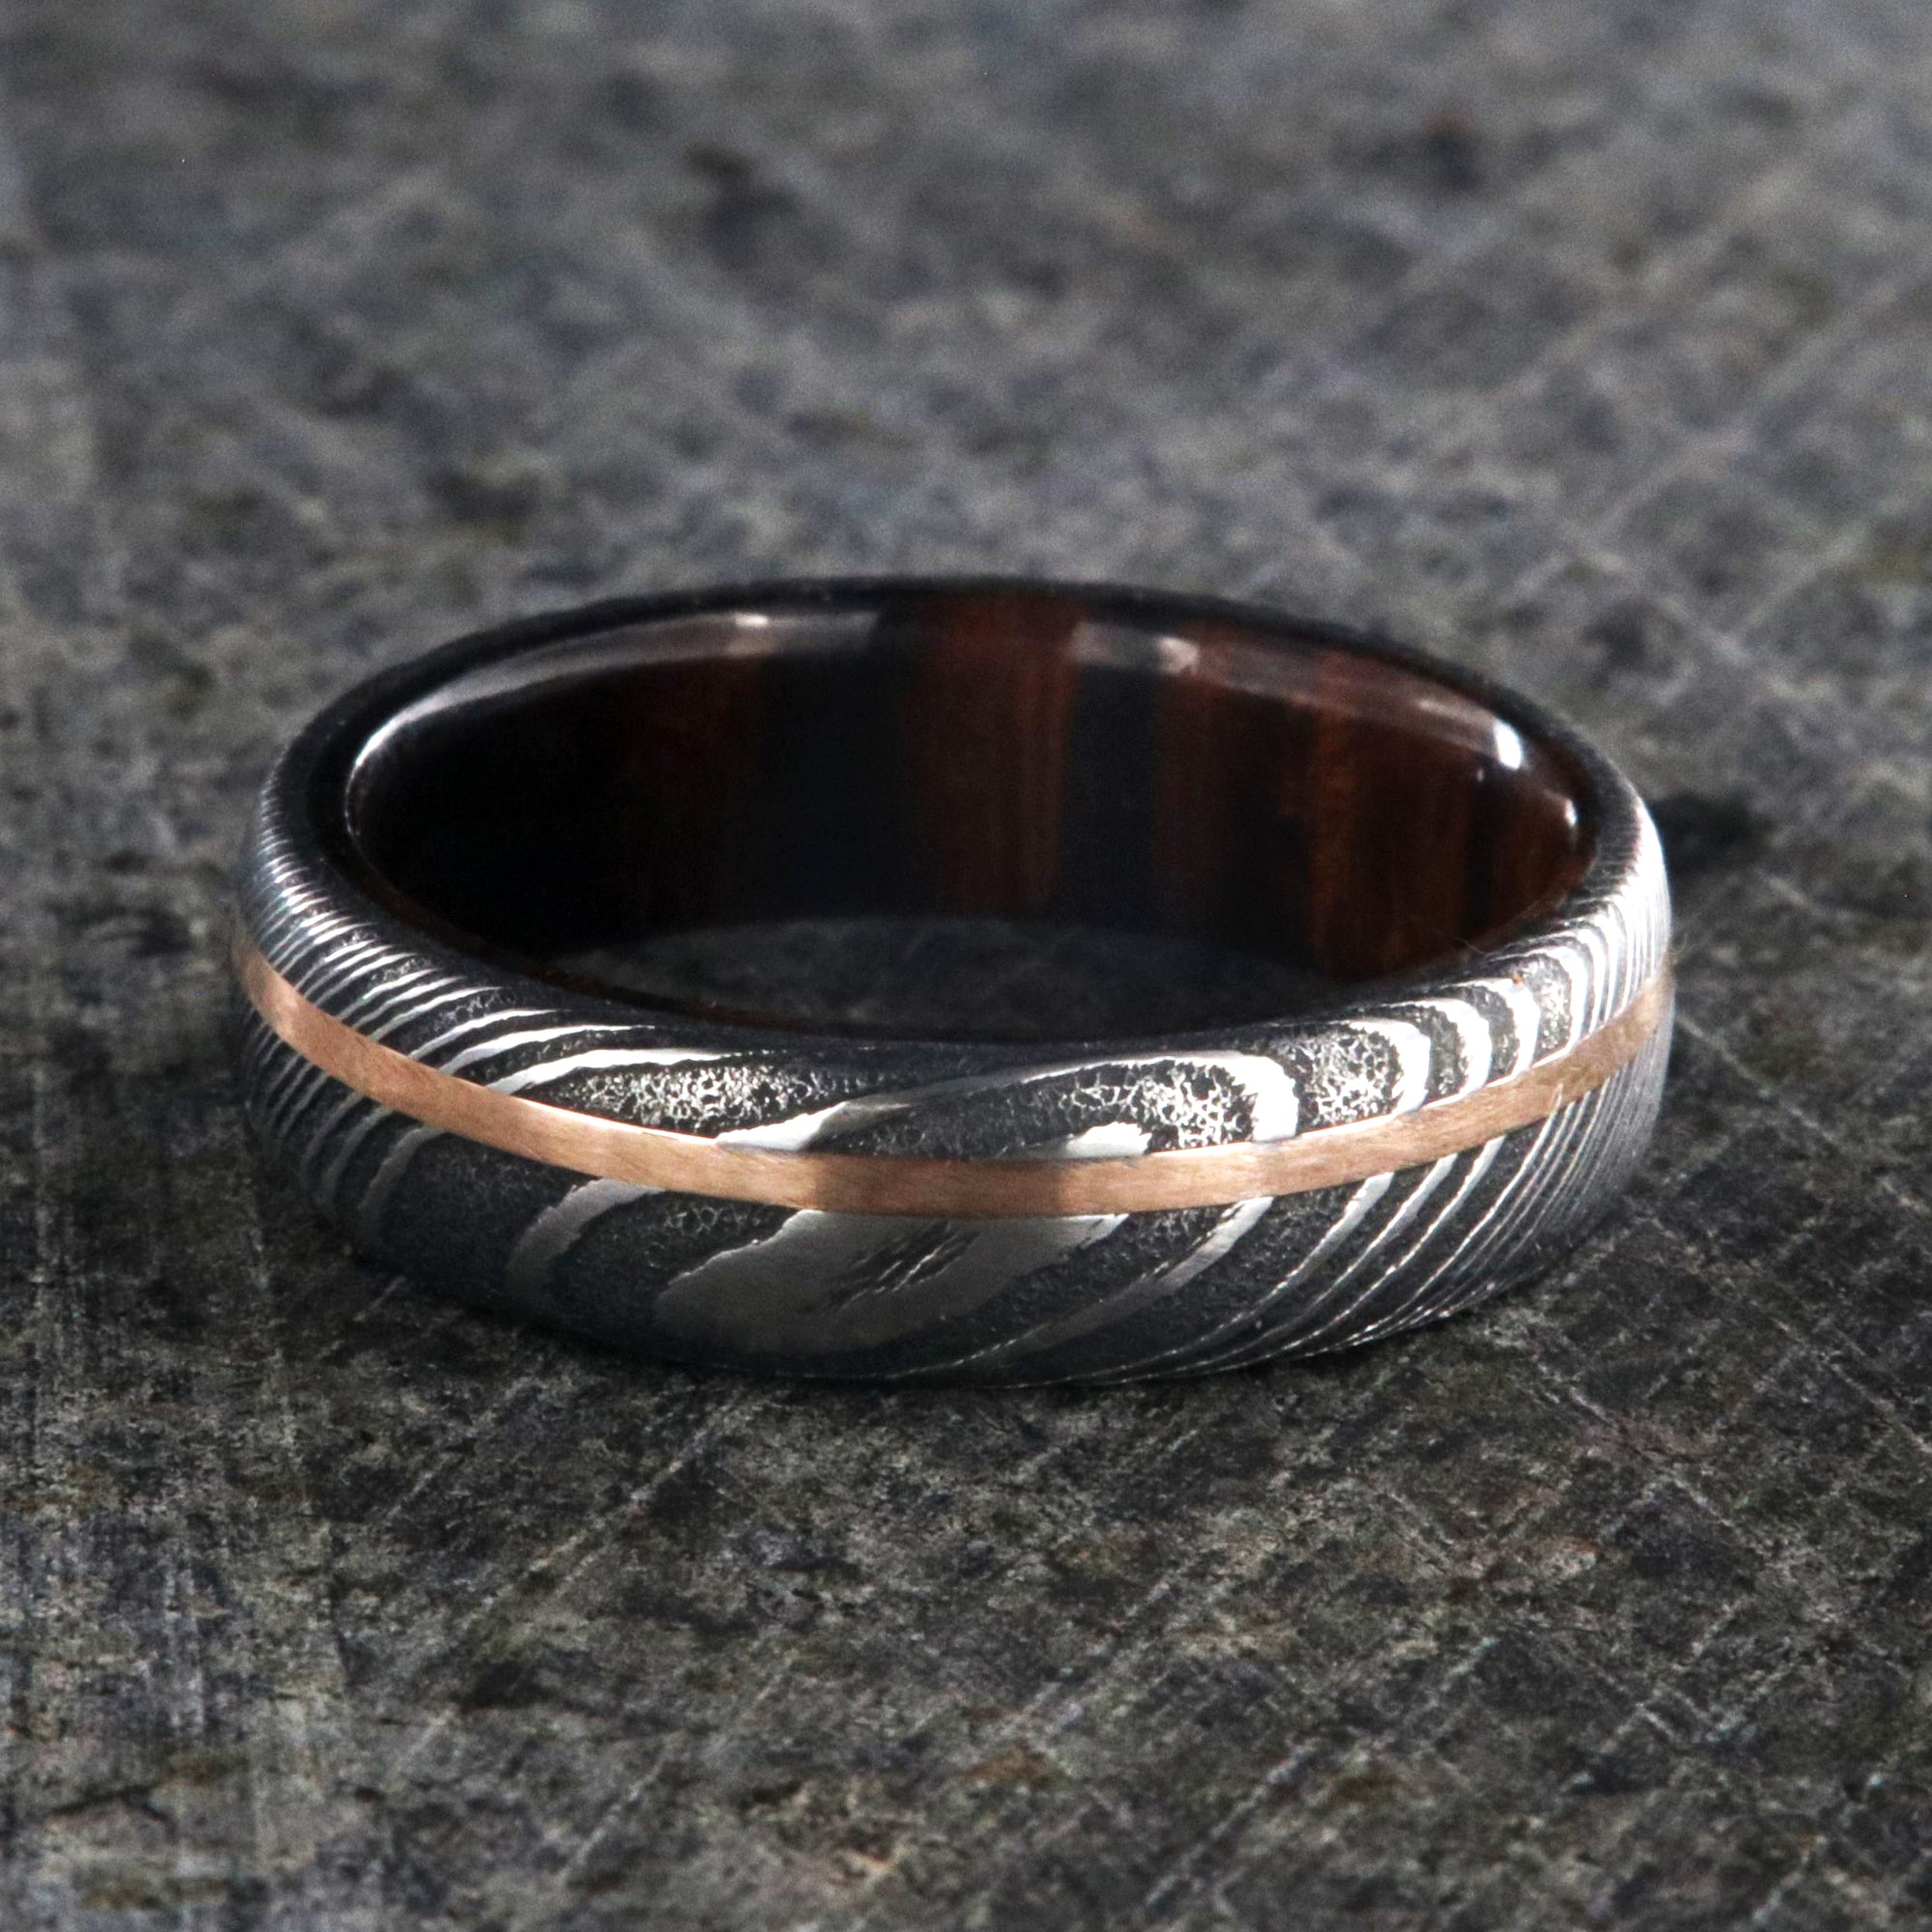 6mm wide black Damascus steel ring with off-center rose gold inlay and an Arizona ironwood sleeve